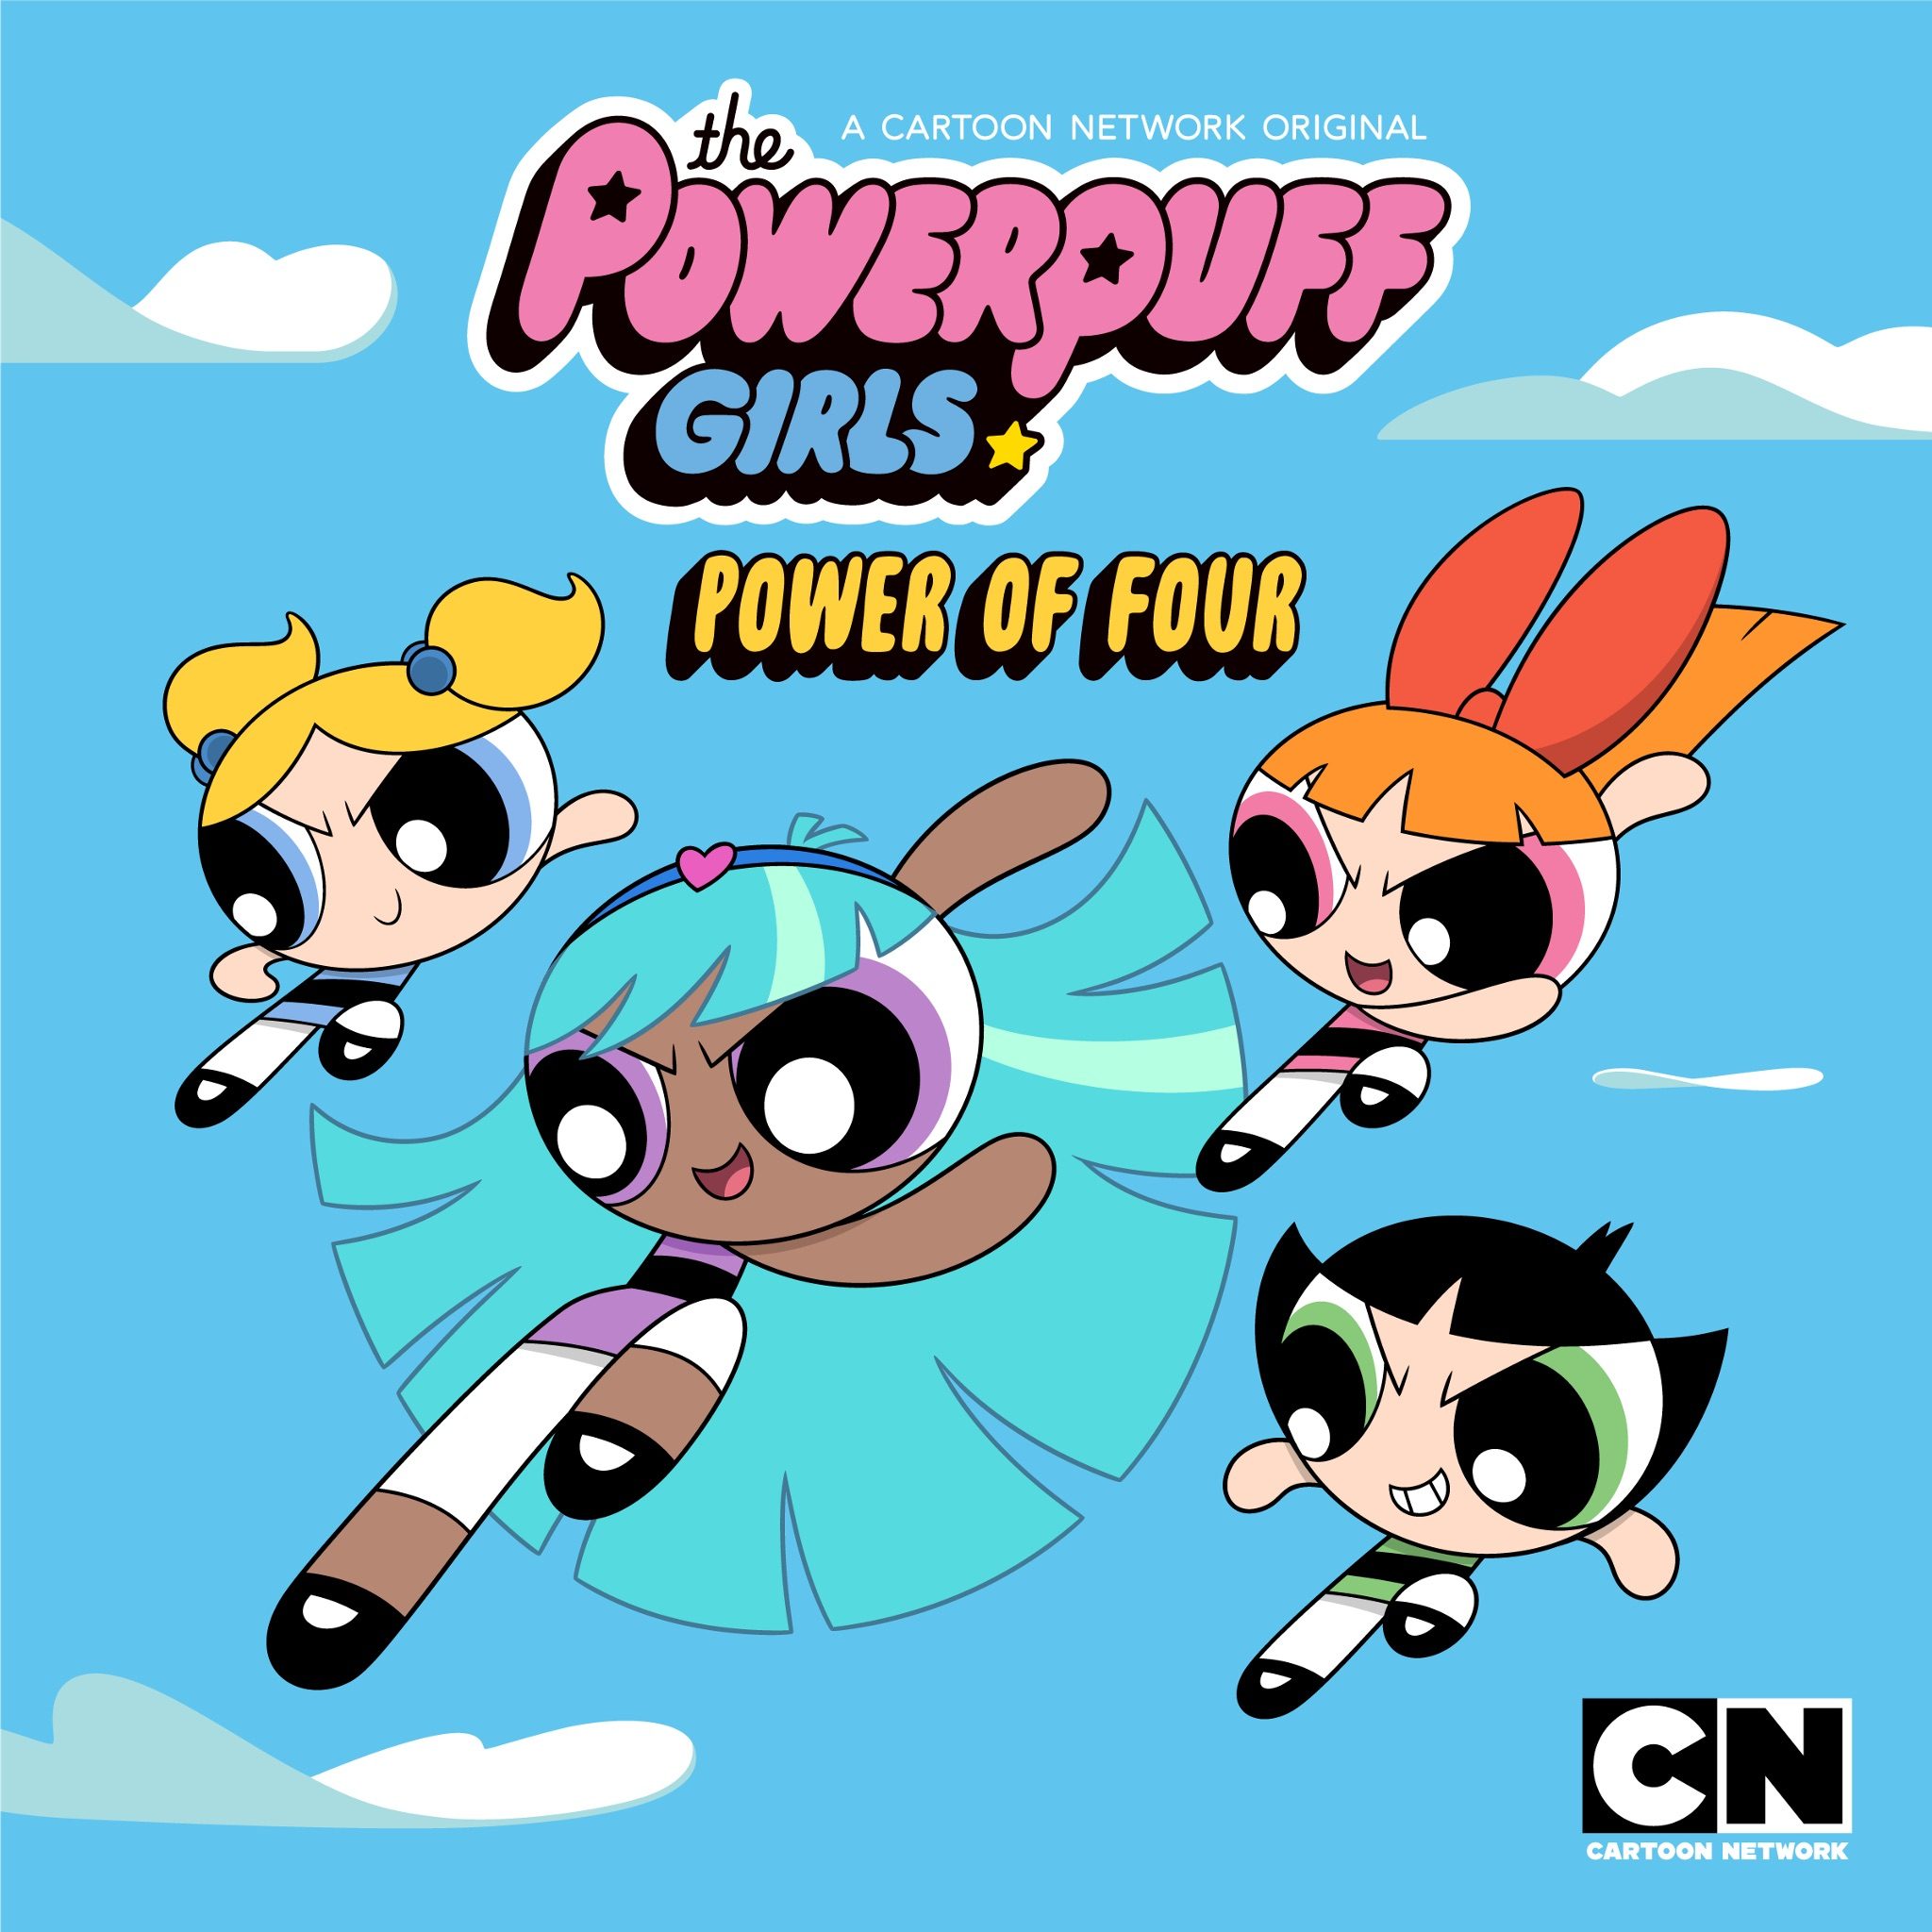 5 things you should know about the new Powerpuff Girl